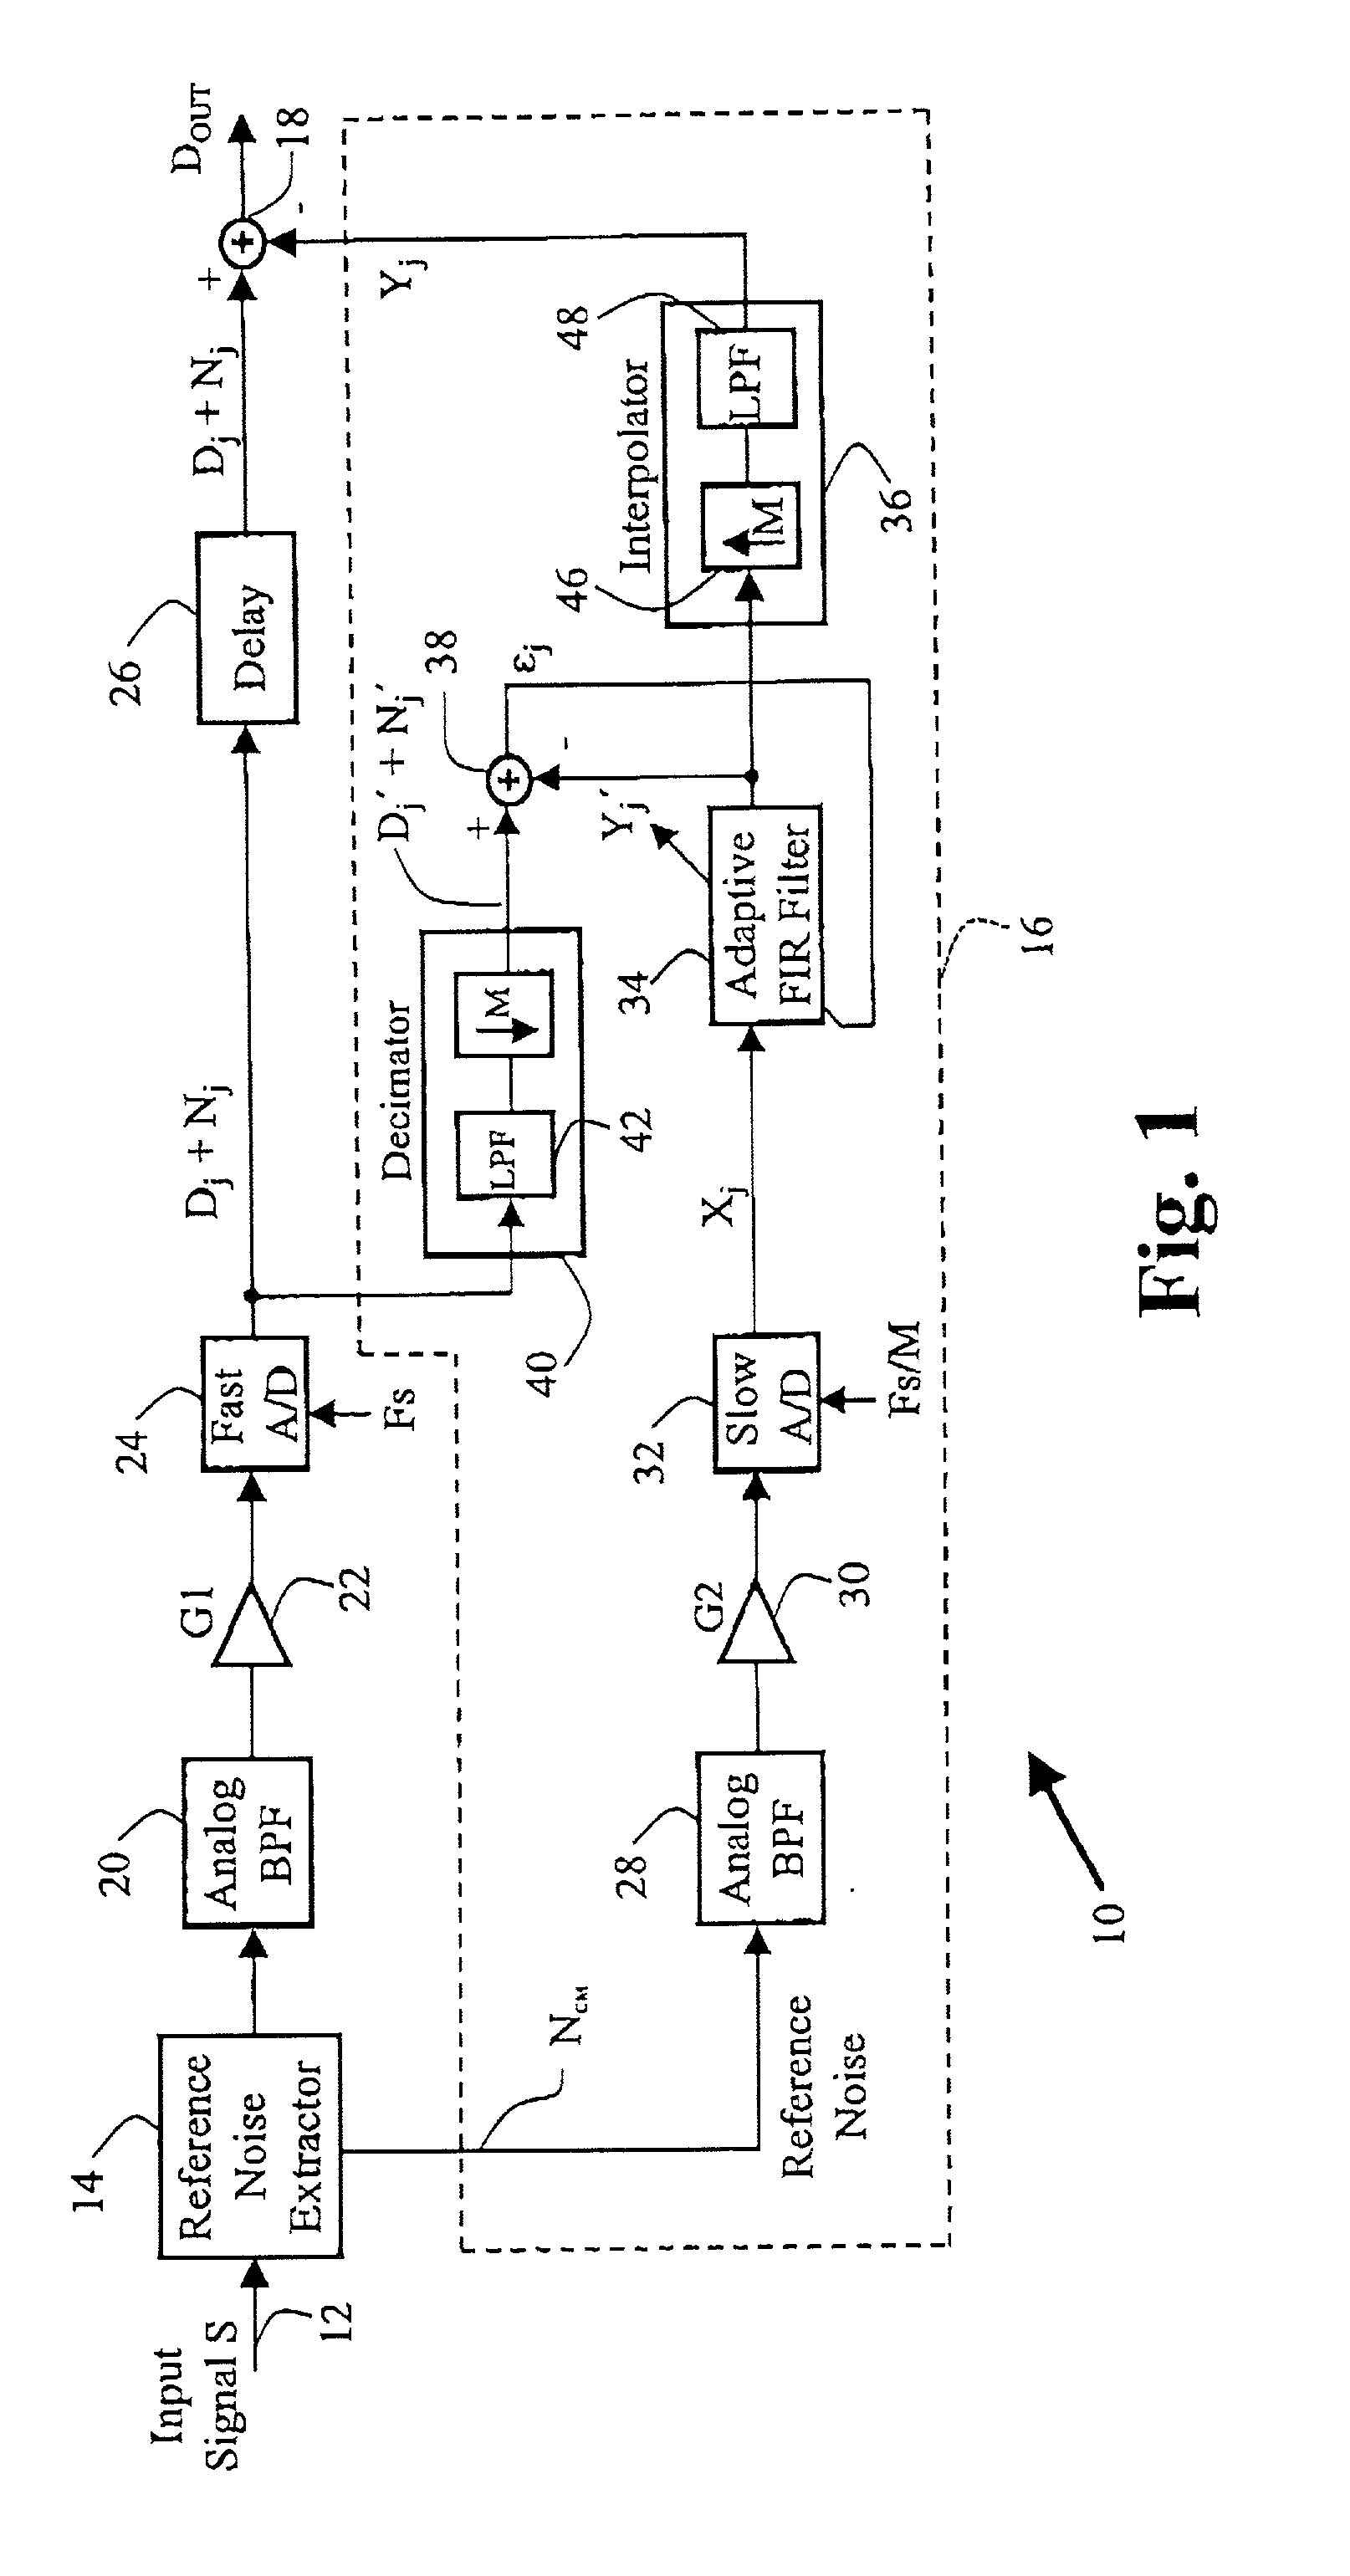 Noise/interference suppression system